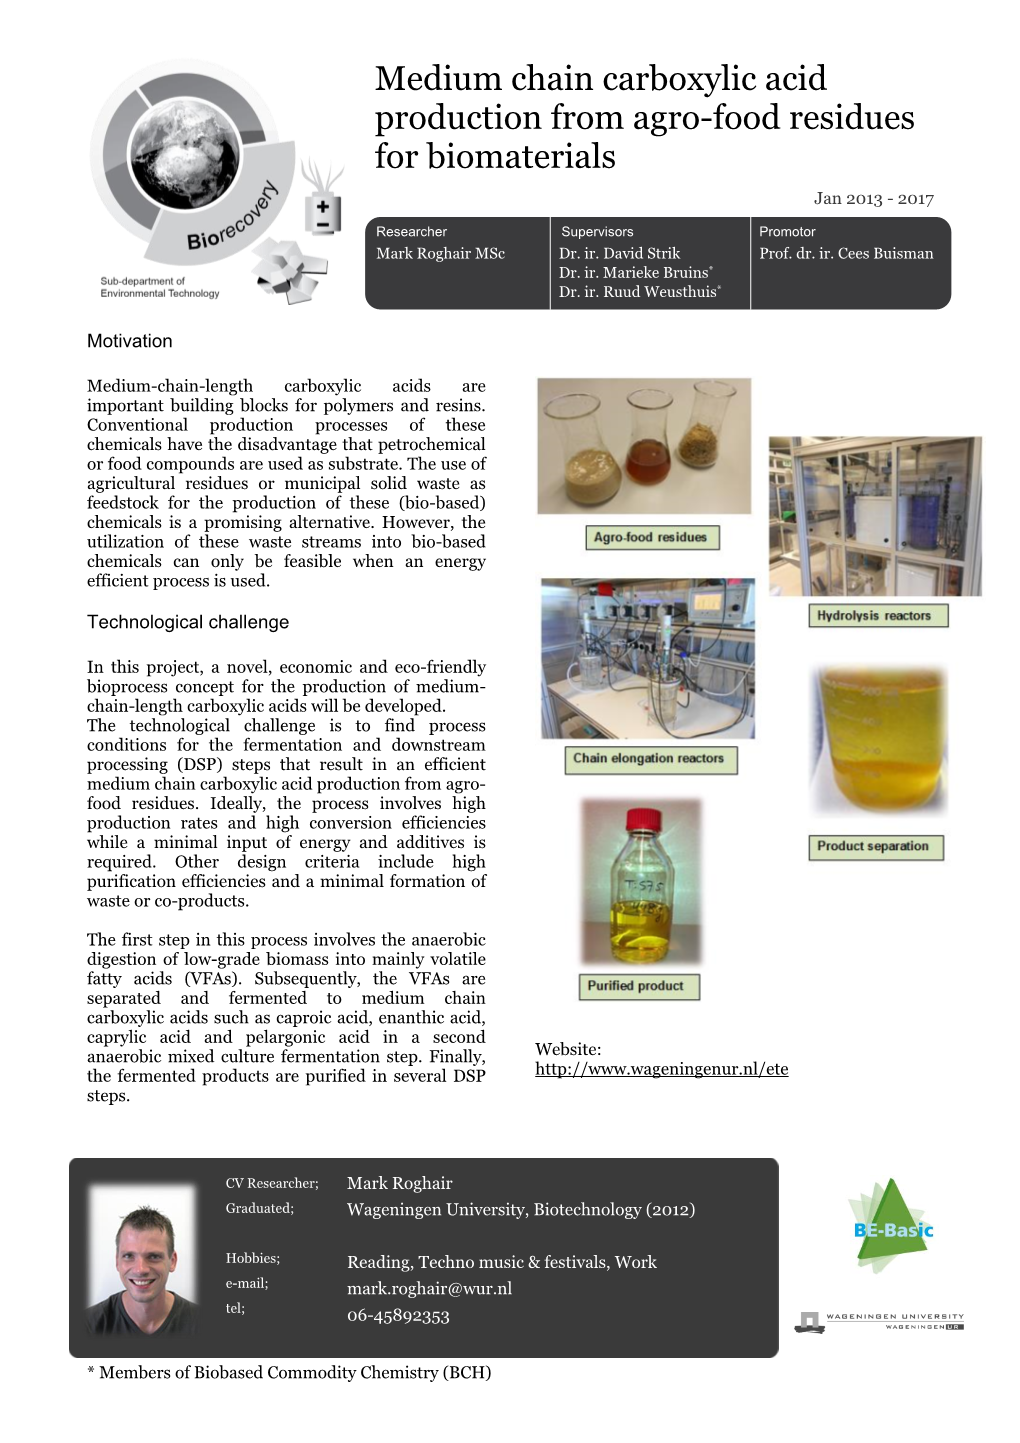 Medium Chain Carboxylic Acid Production from Agro-Food Residues for Biomaterials